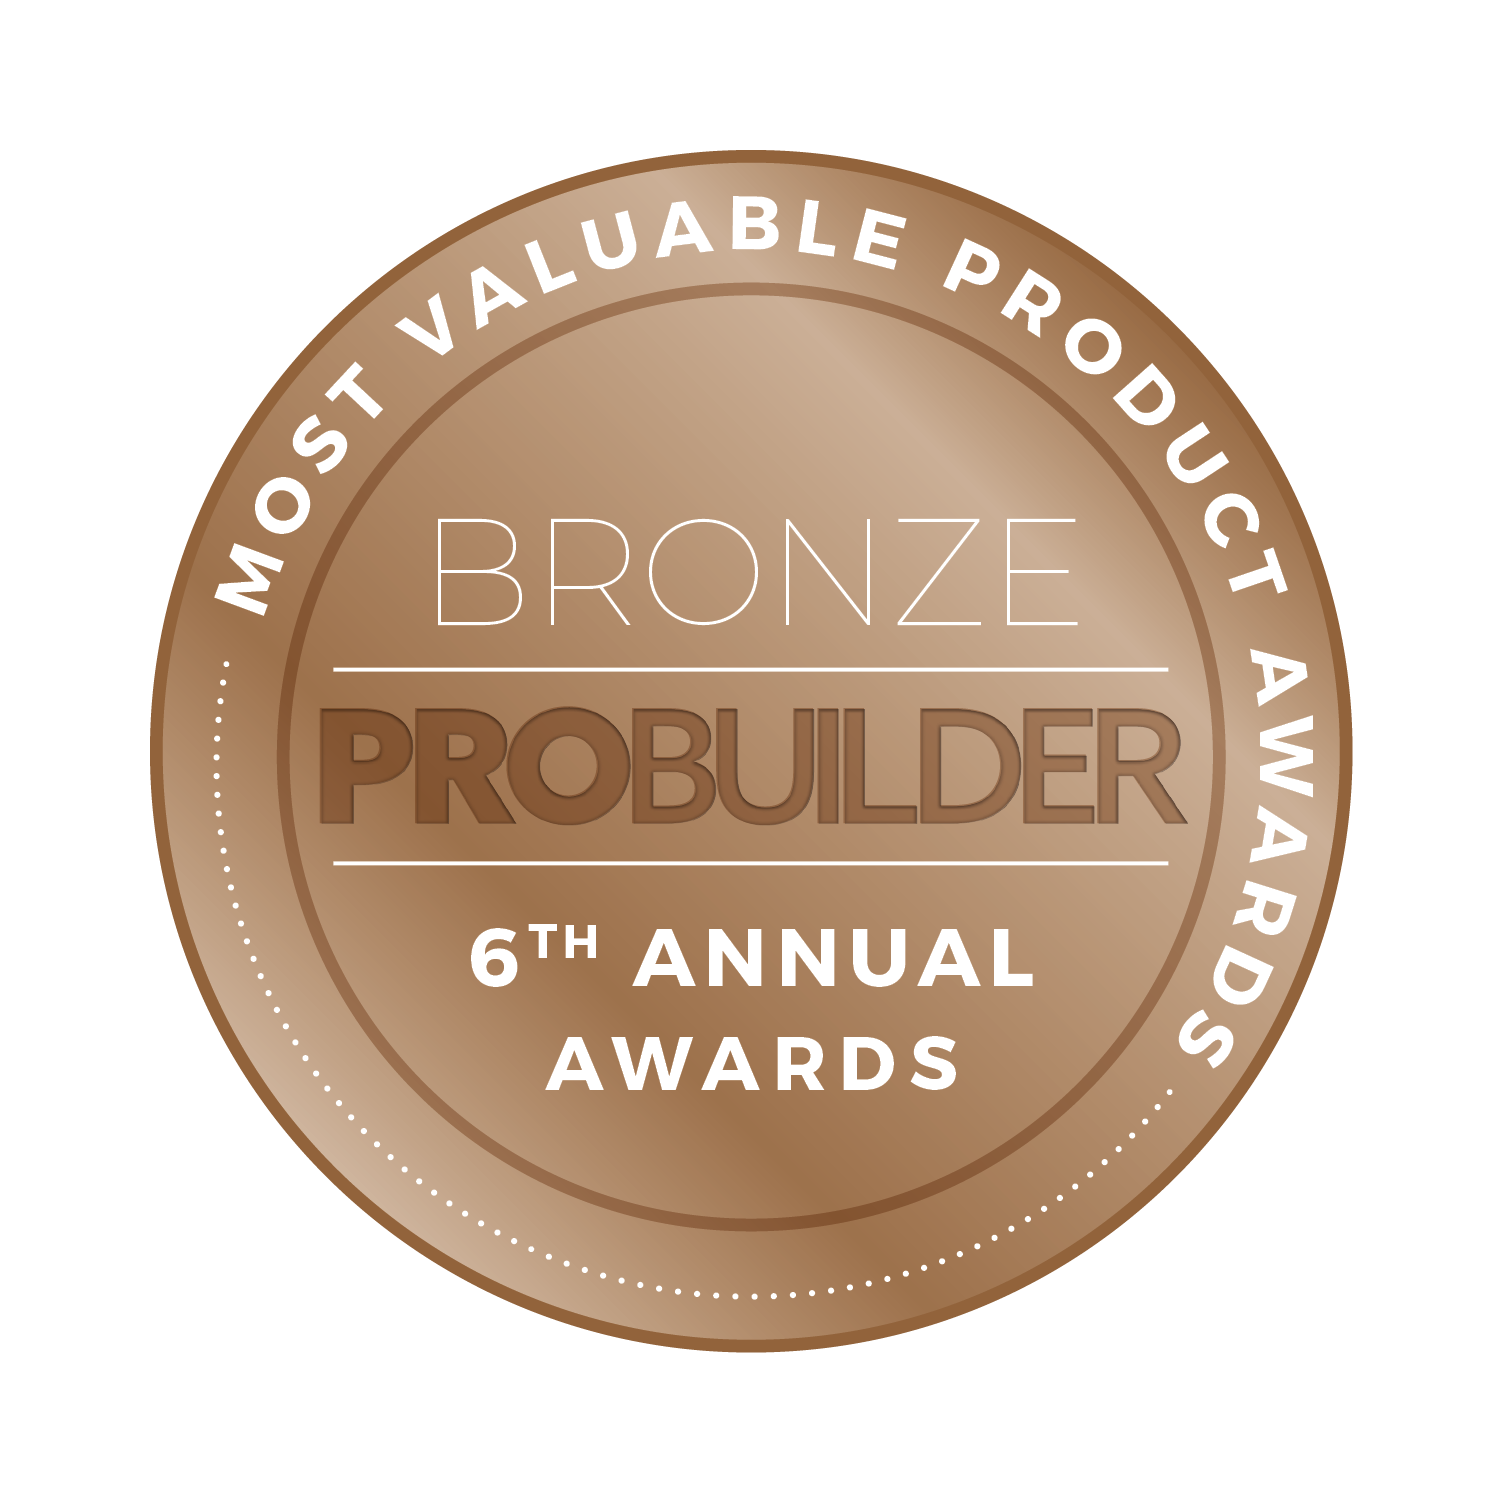 Most Valuable Product Awards bronze winners